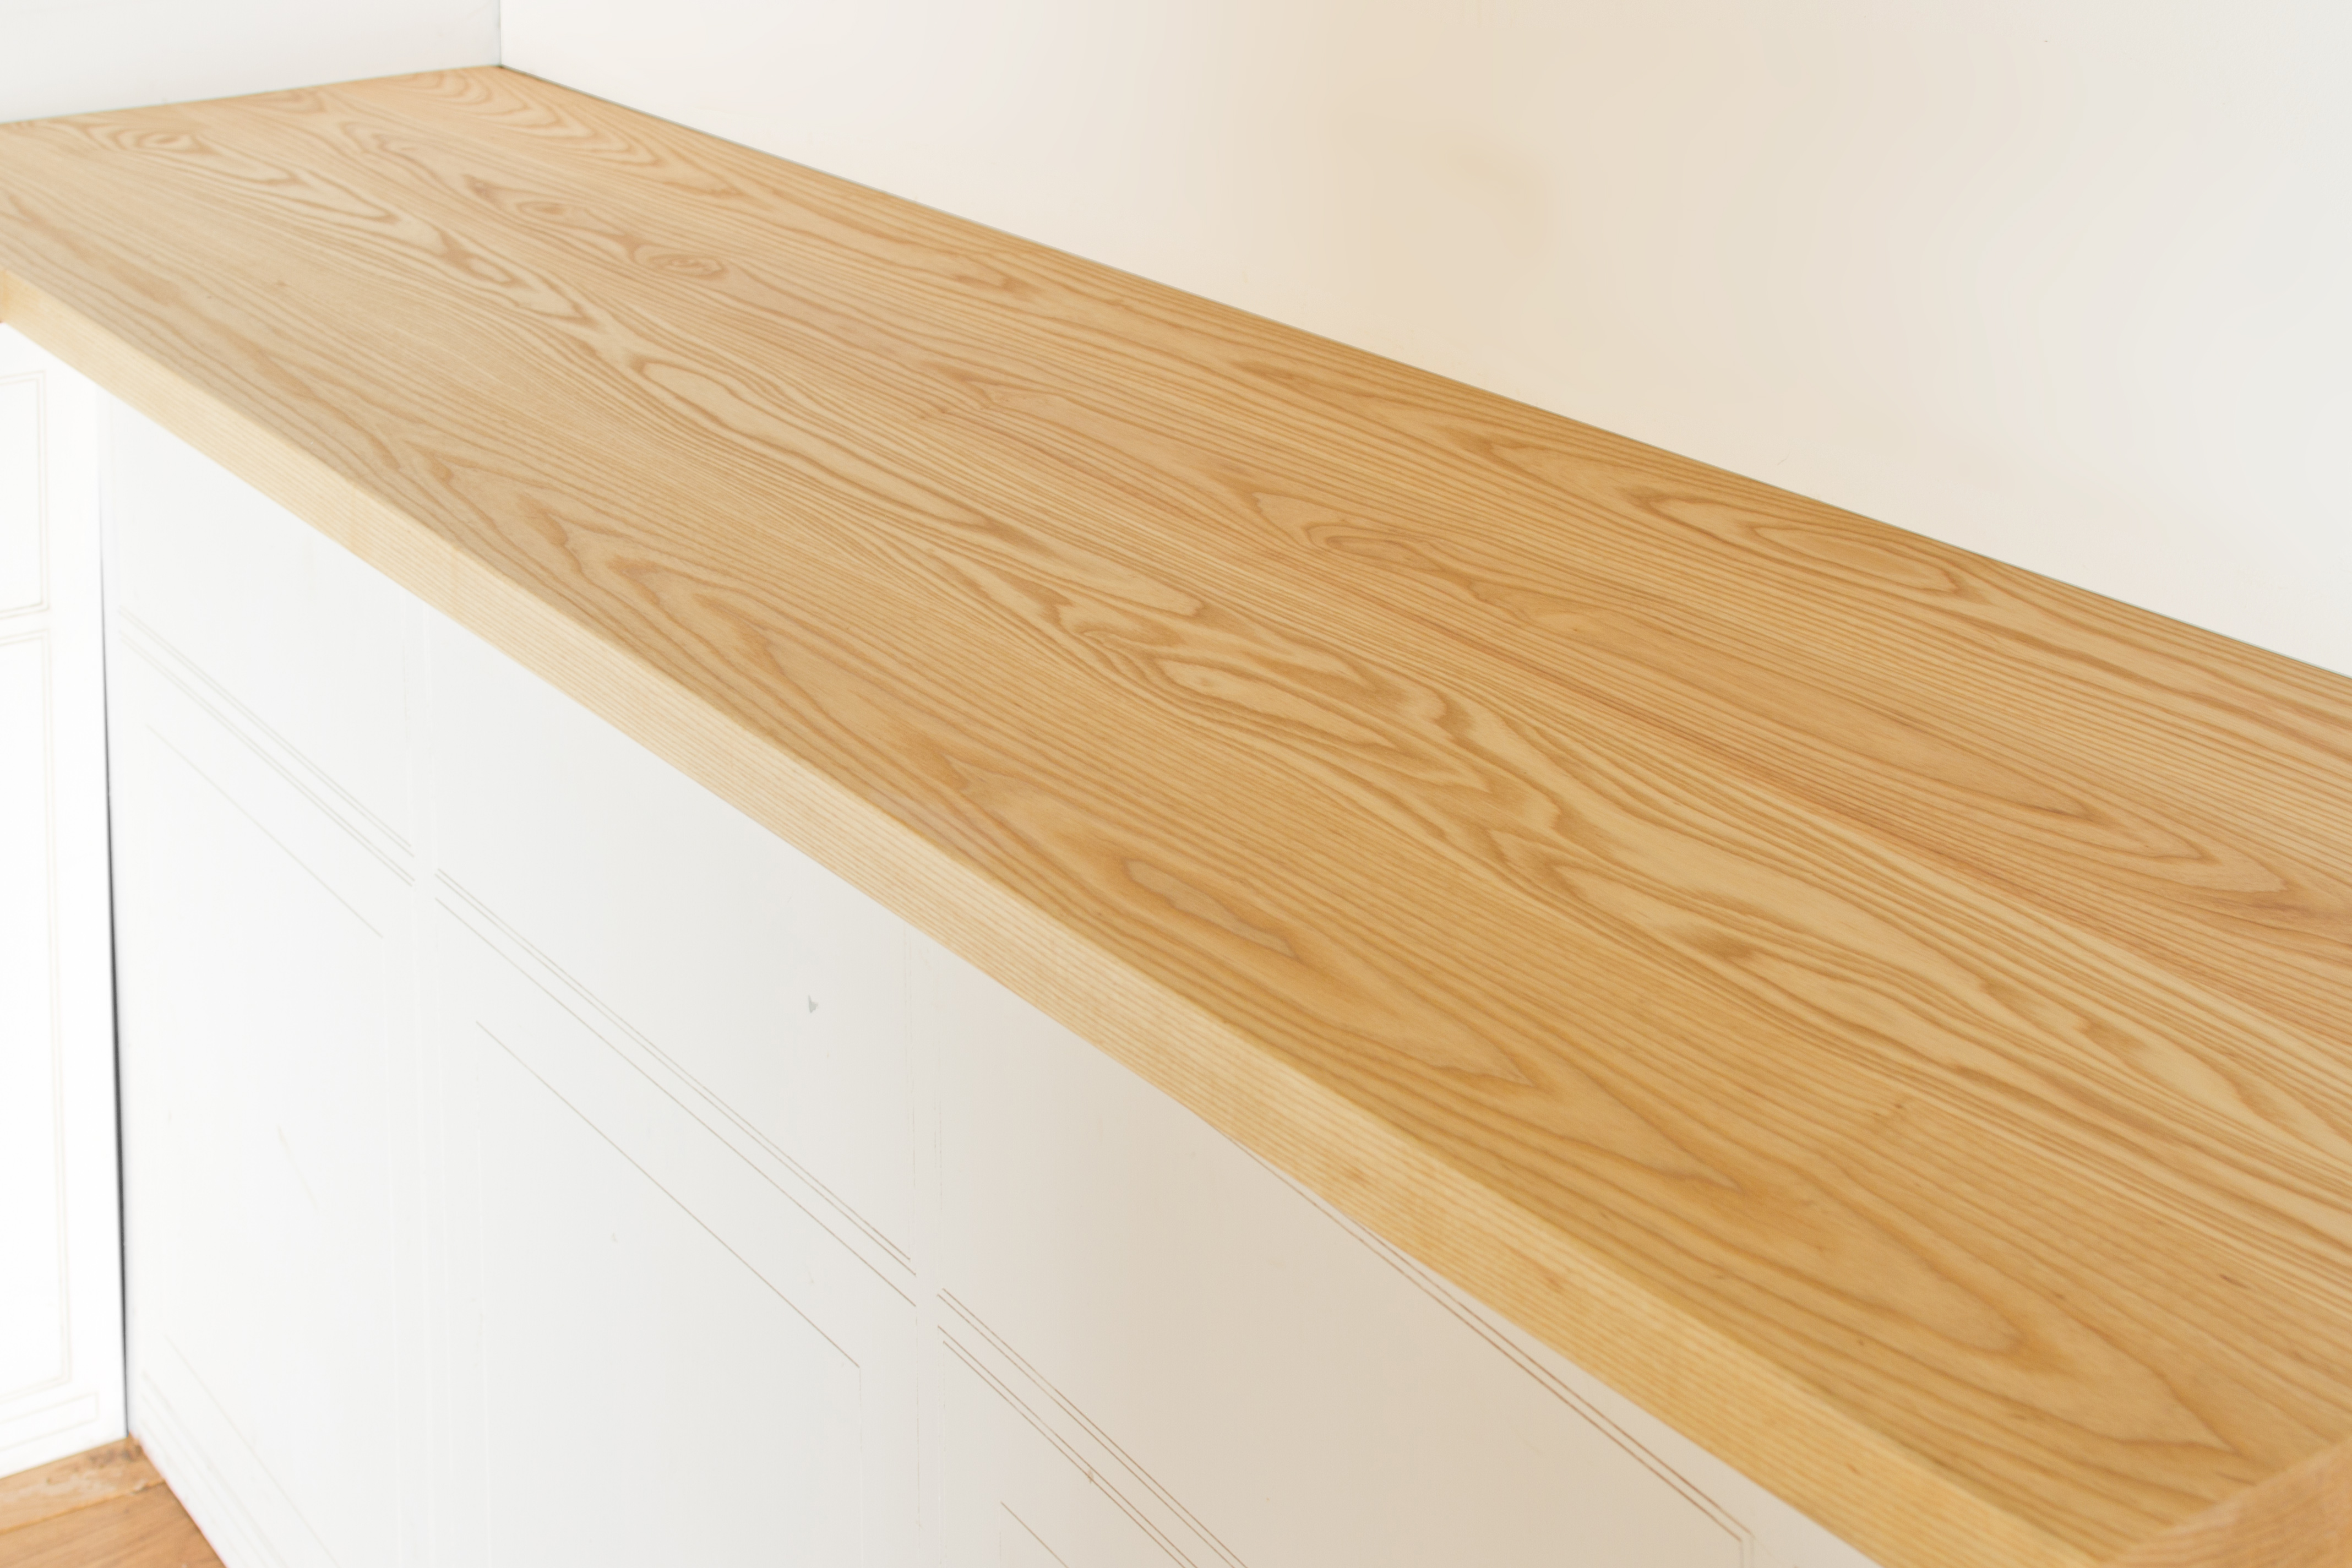 Solid Wood Farmhouse Ash Timber Worktop 3mx620mmx40mm 